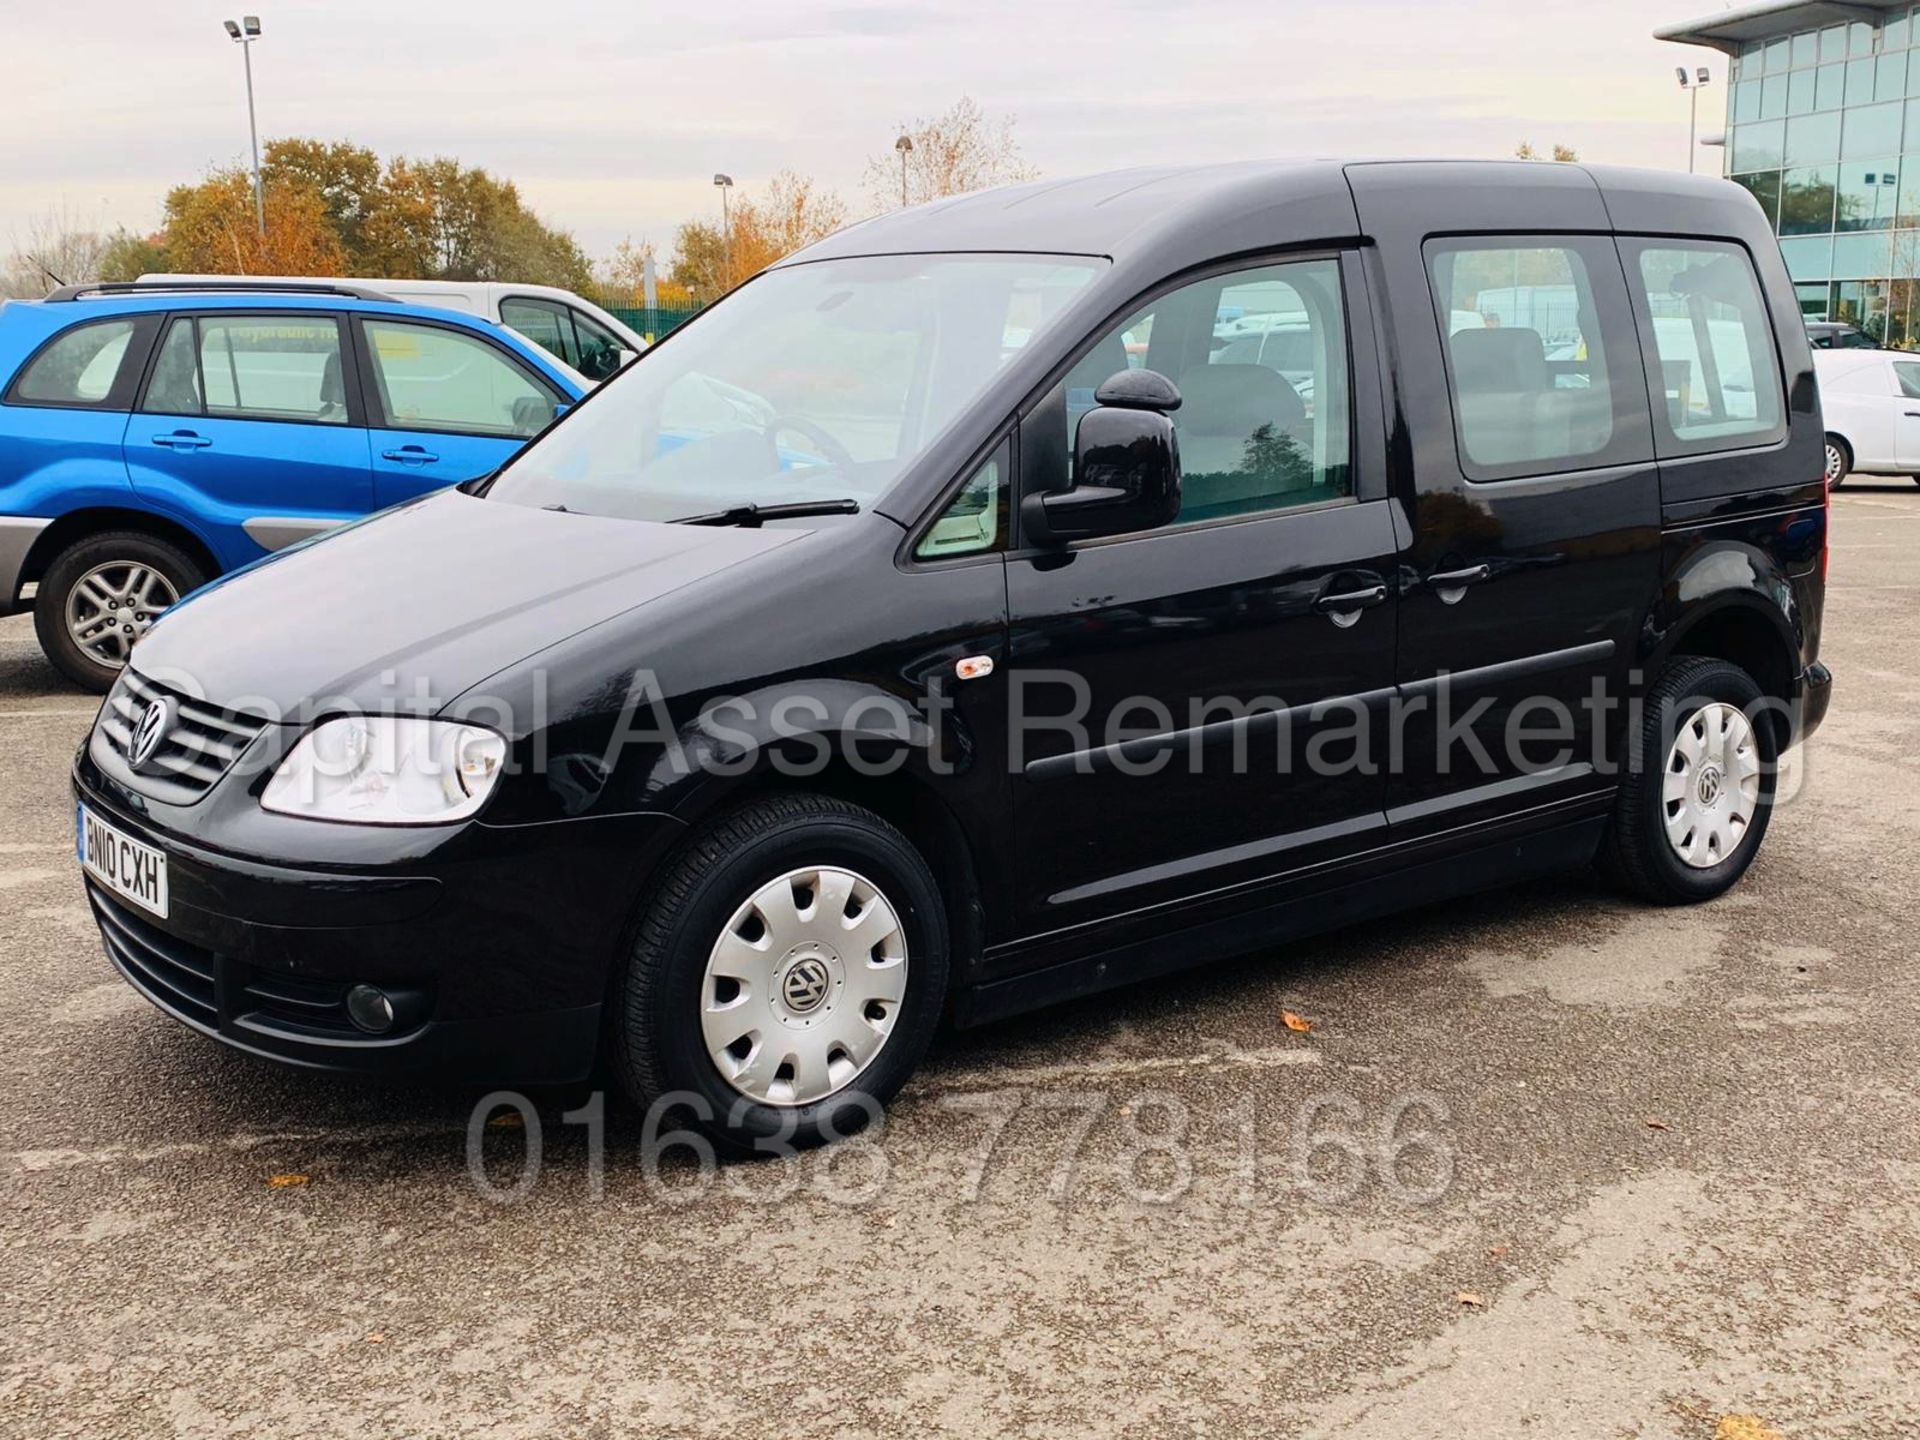 VOLKSWAGEN CADDY C20 *LIFE* DISABILITY ACCESS / WAV (2010) '1.9 TDI - AUTO' *A/C* (ONLY 22K MILES) - Image 5 of 32